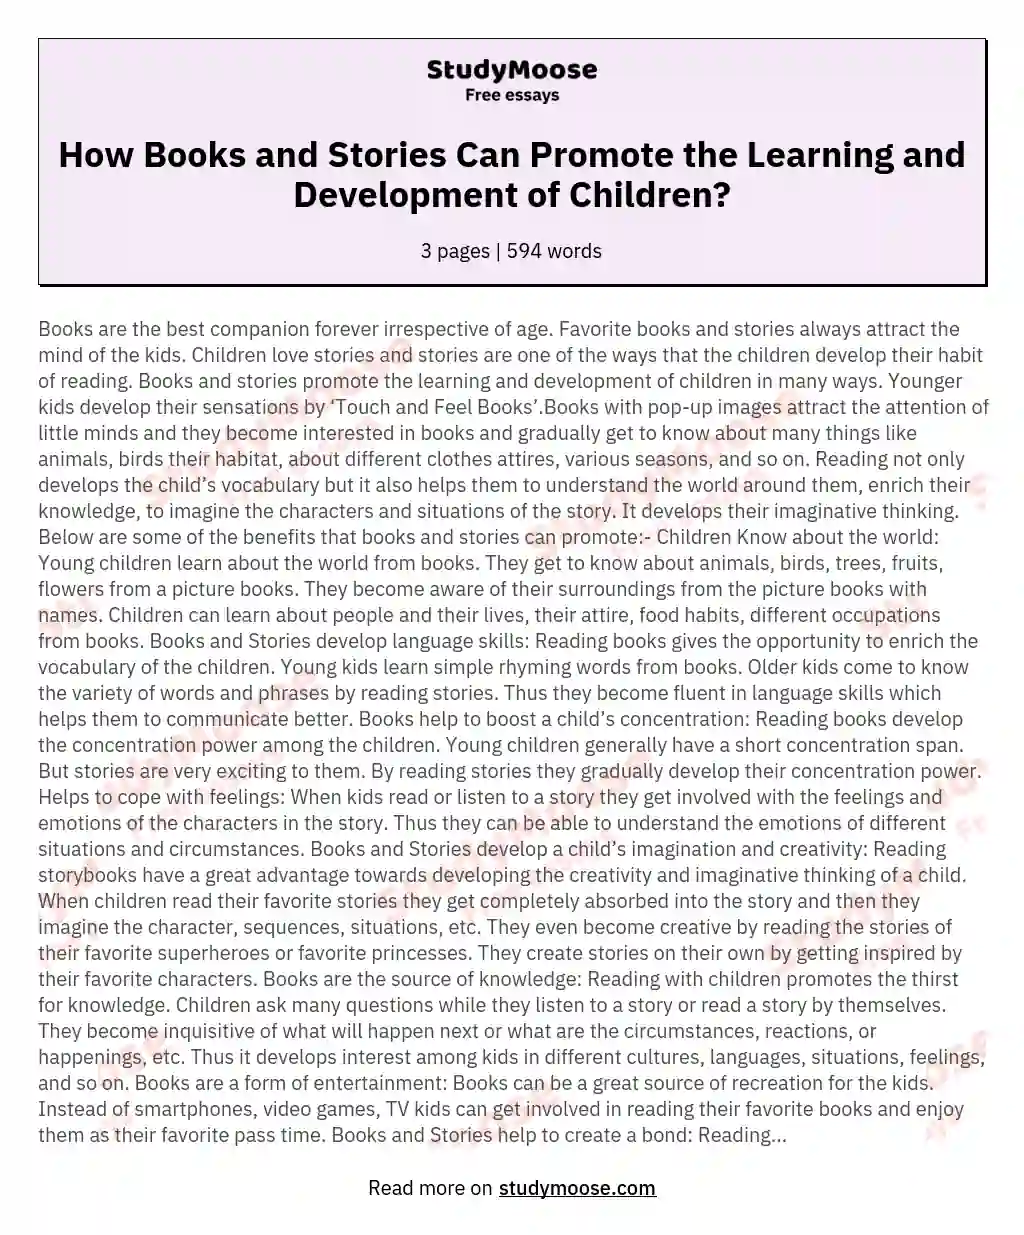 How Books and Stories Can Promote the Learning and Development of Children? essay